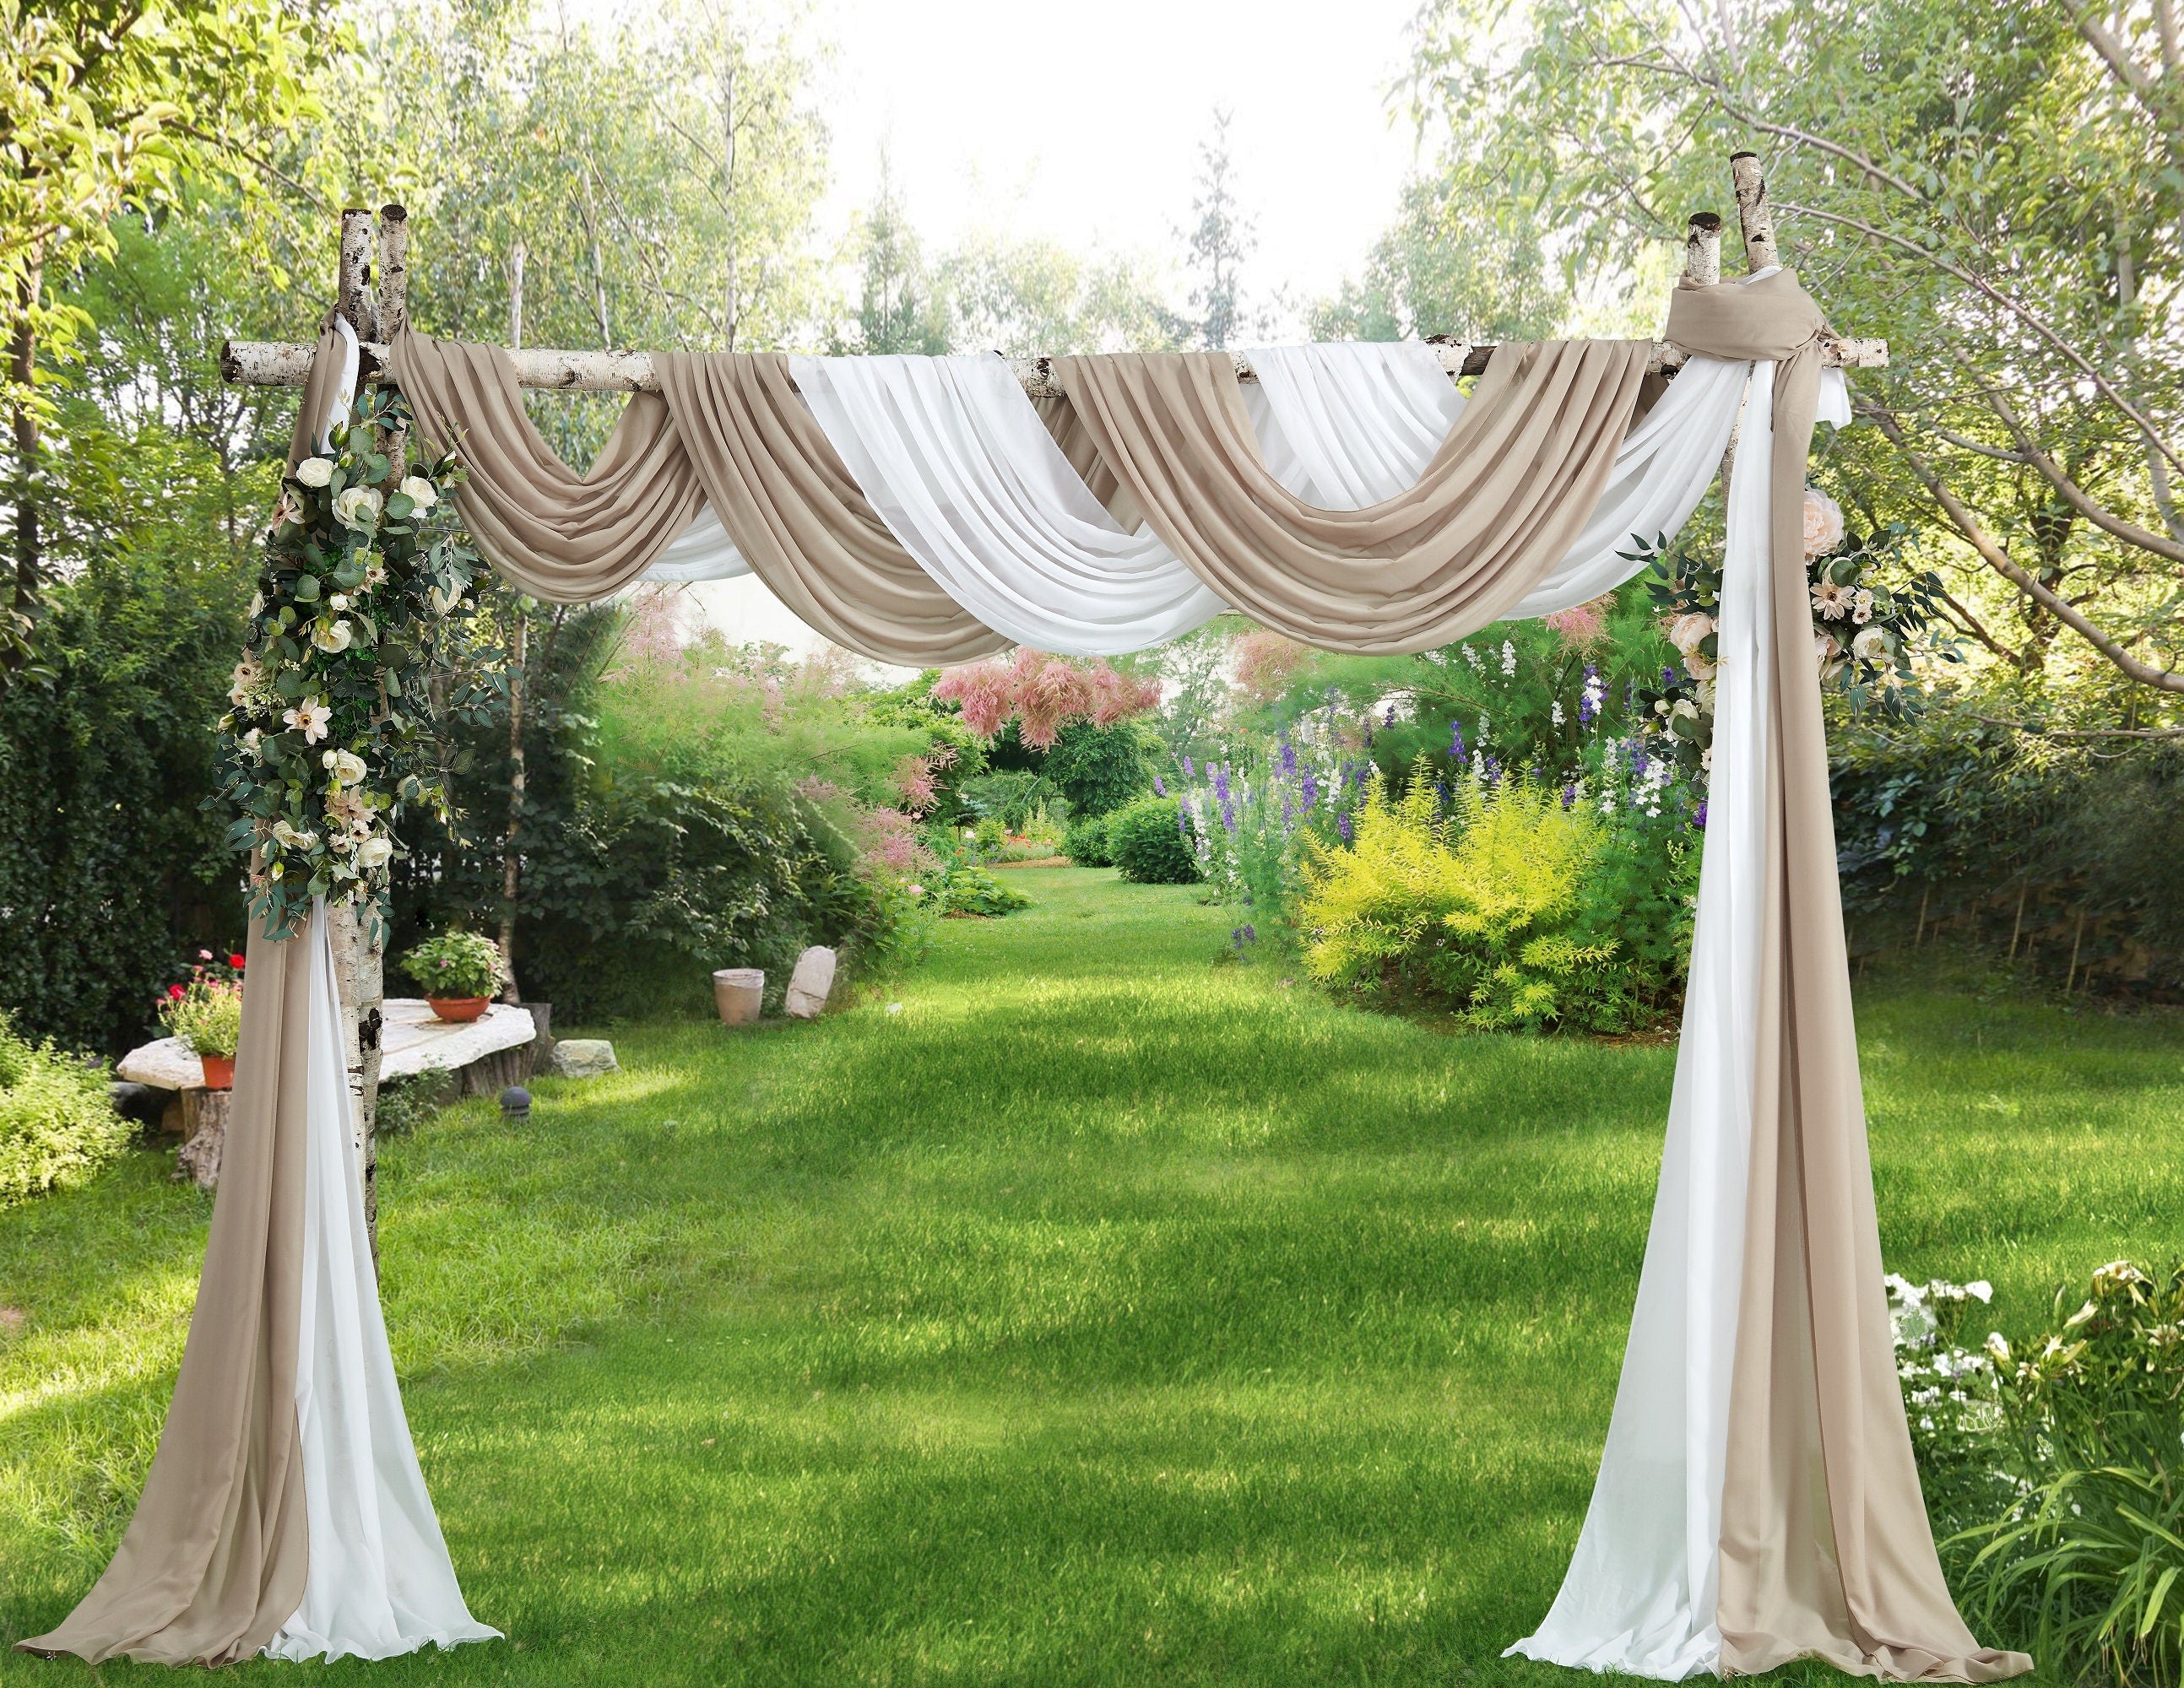 2 Chiffon Wedding Arch Draping Fabric Scarves in 18 or 24 Foot